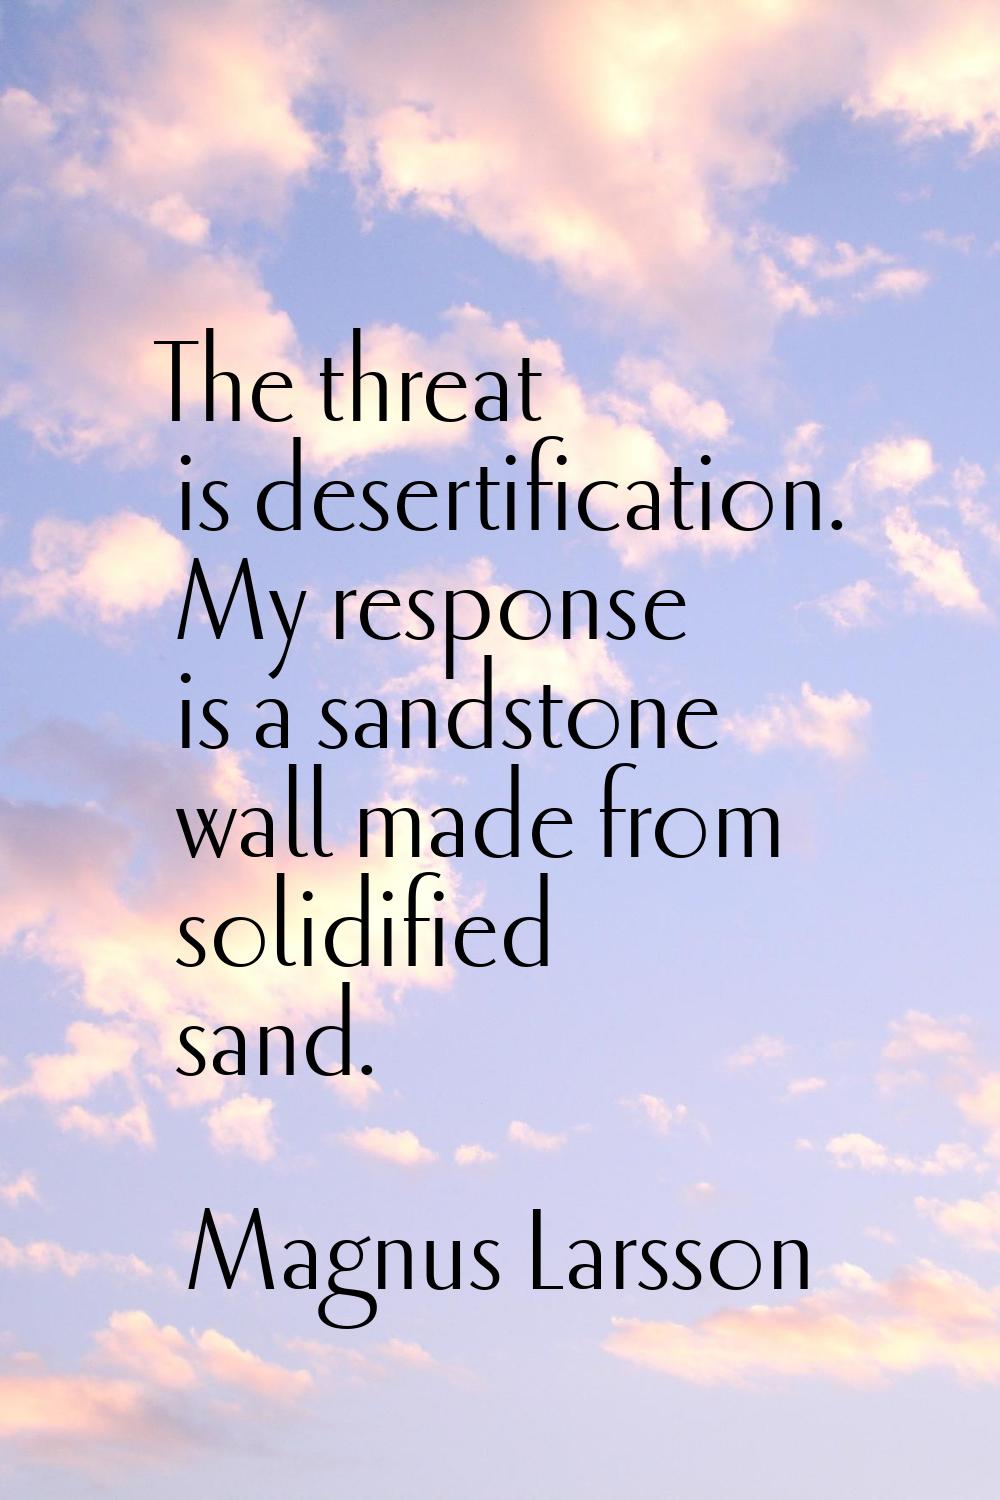 The threat is desertification. My response is a sandstone wall made from solidified sand.